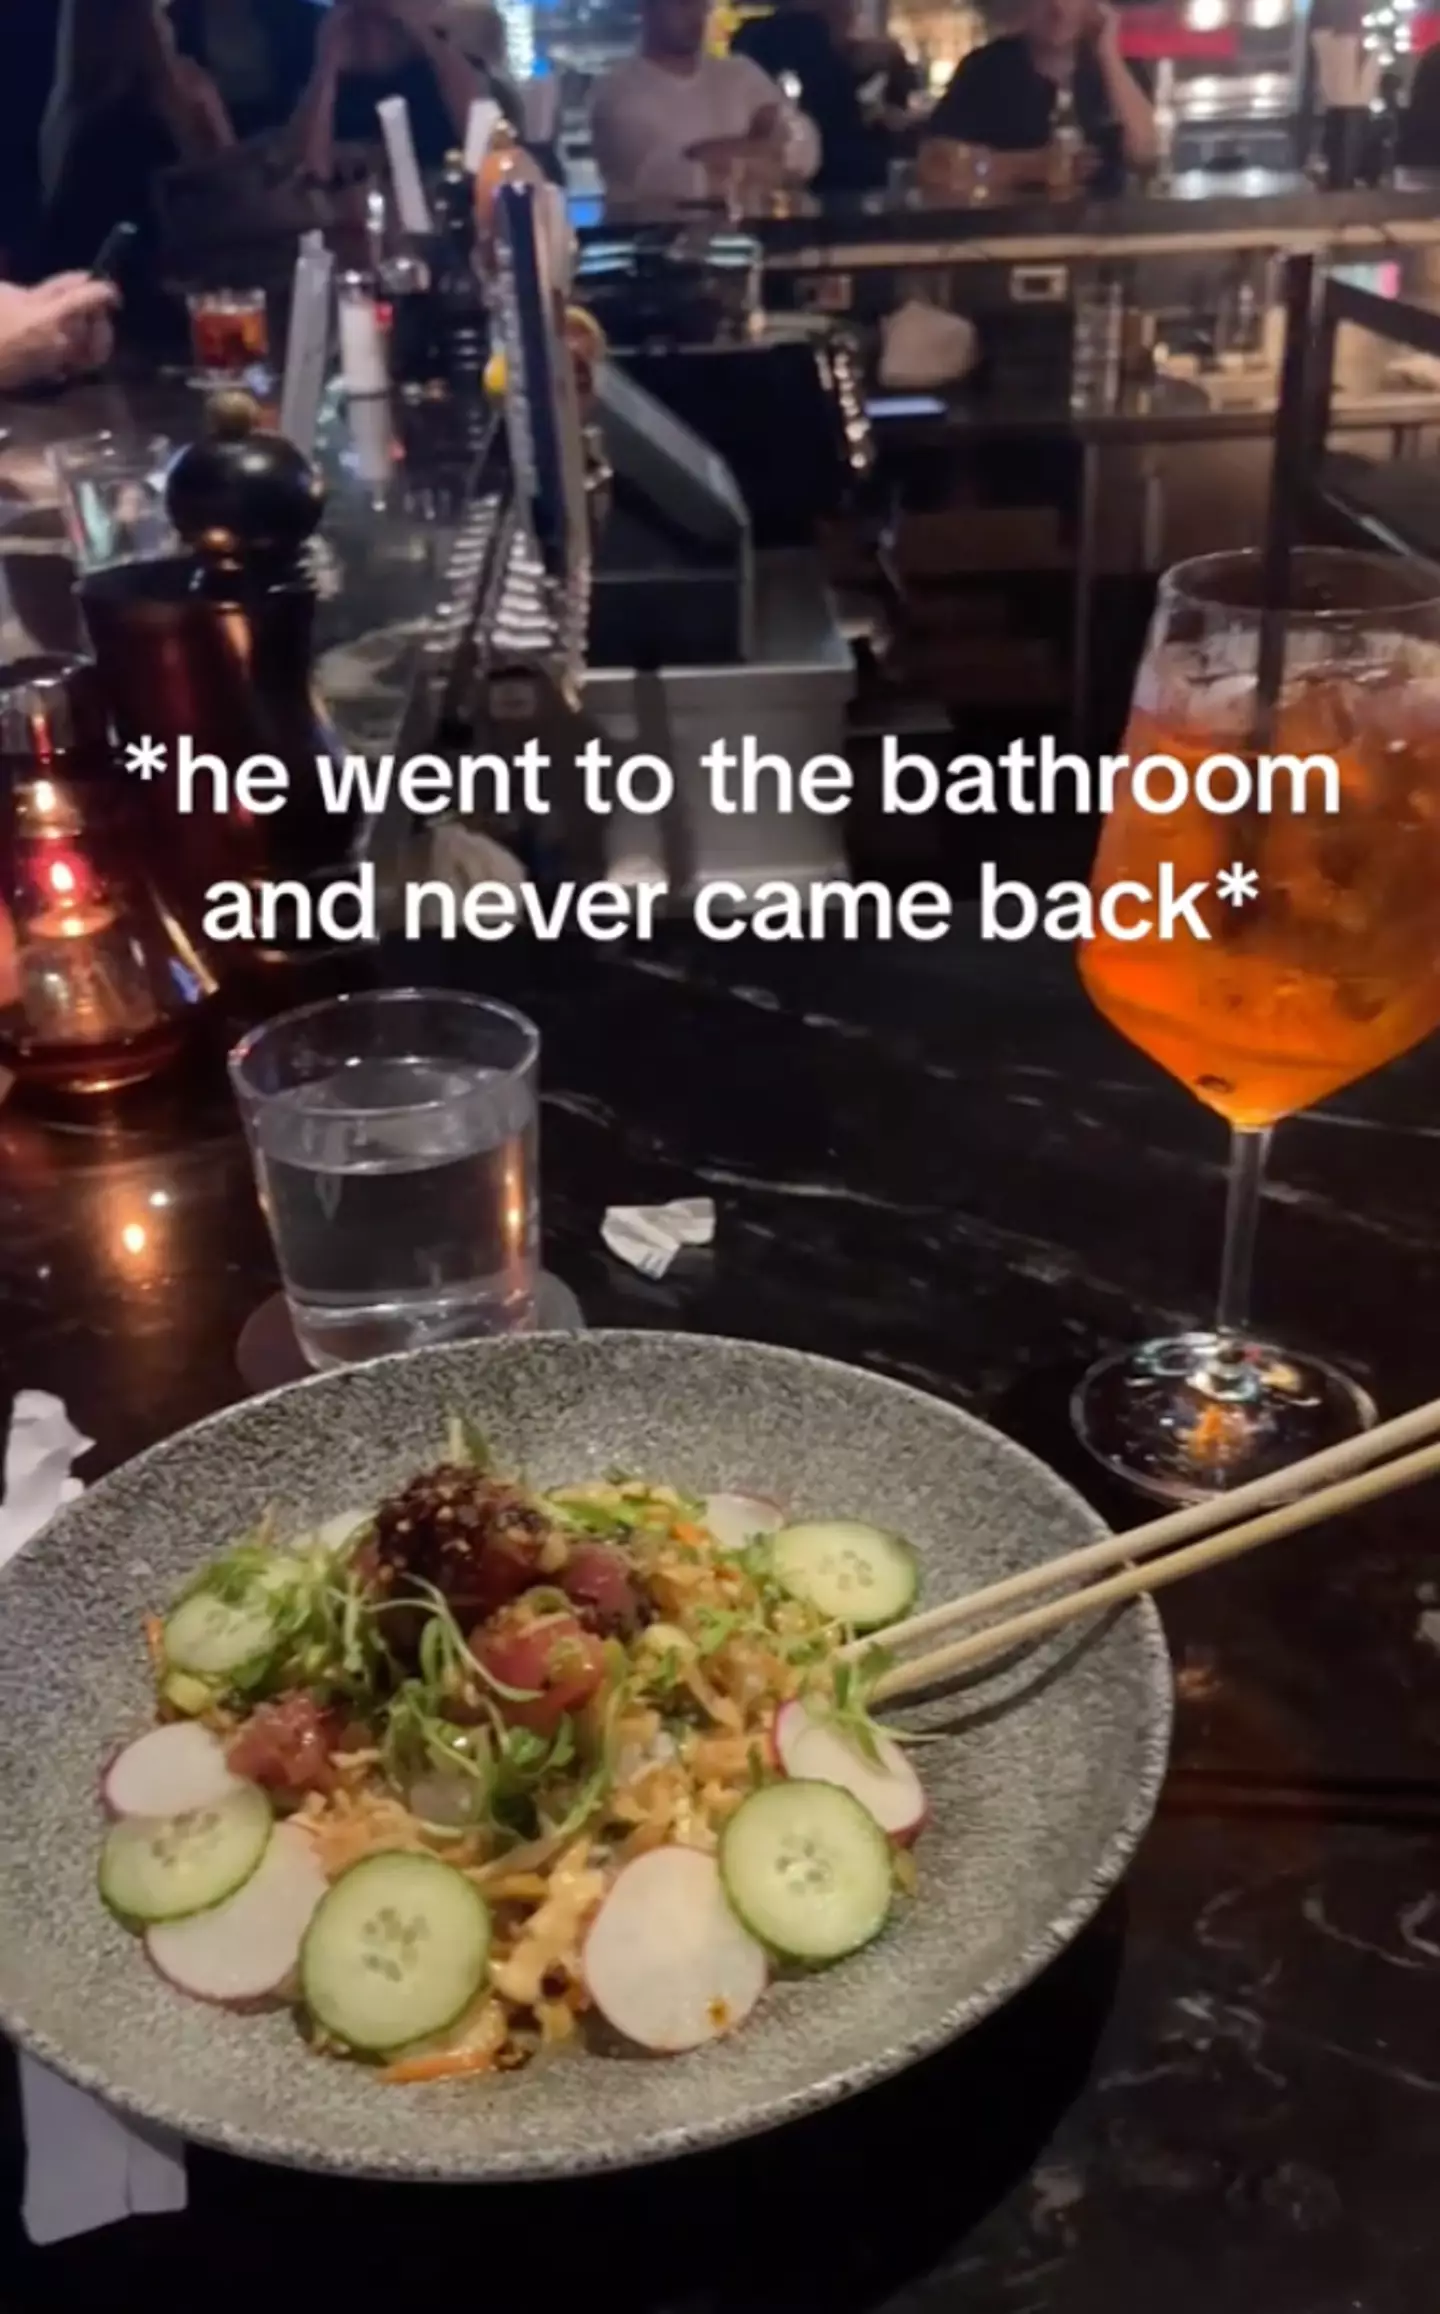 People were left baffled by the dating horror story.